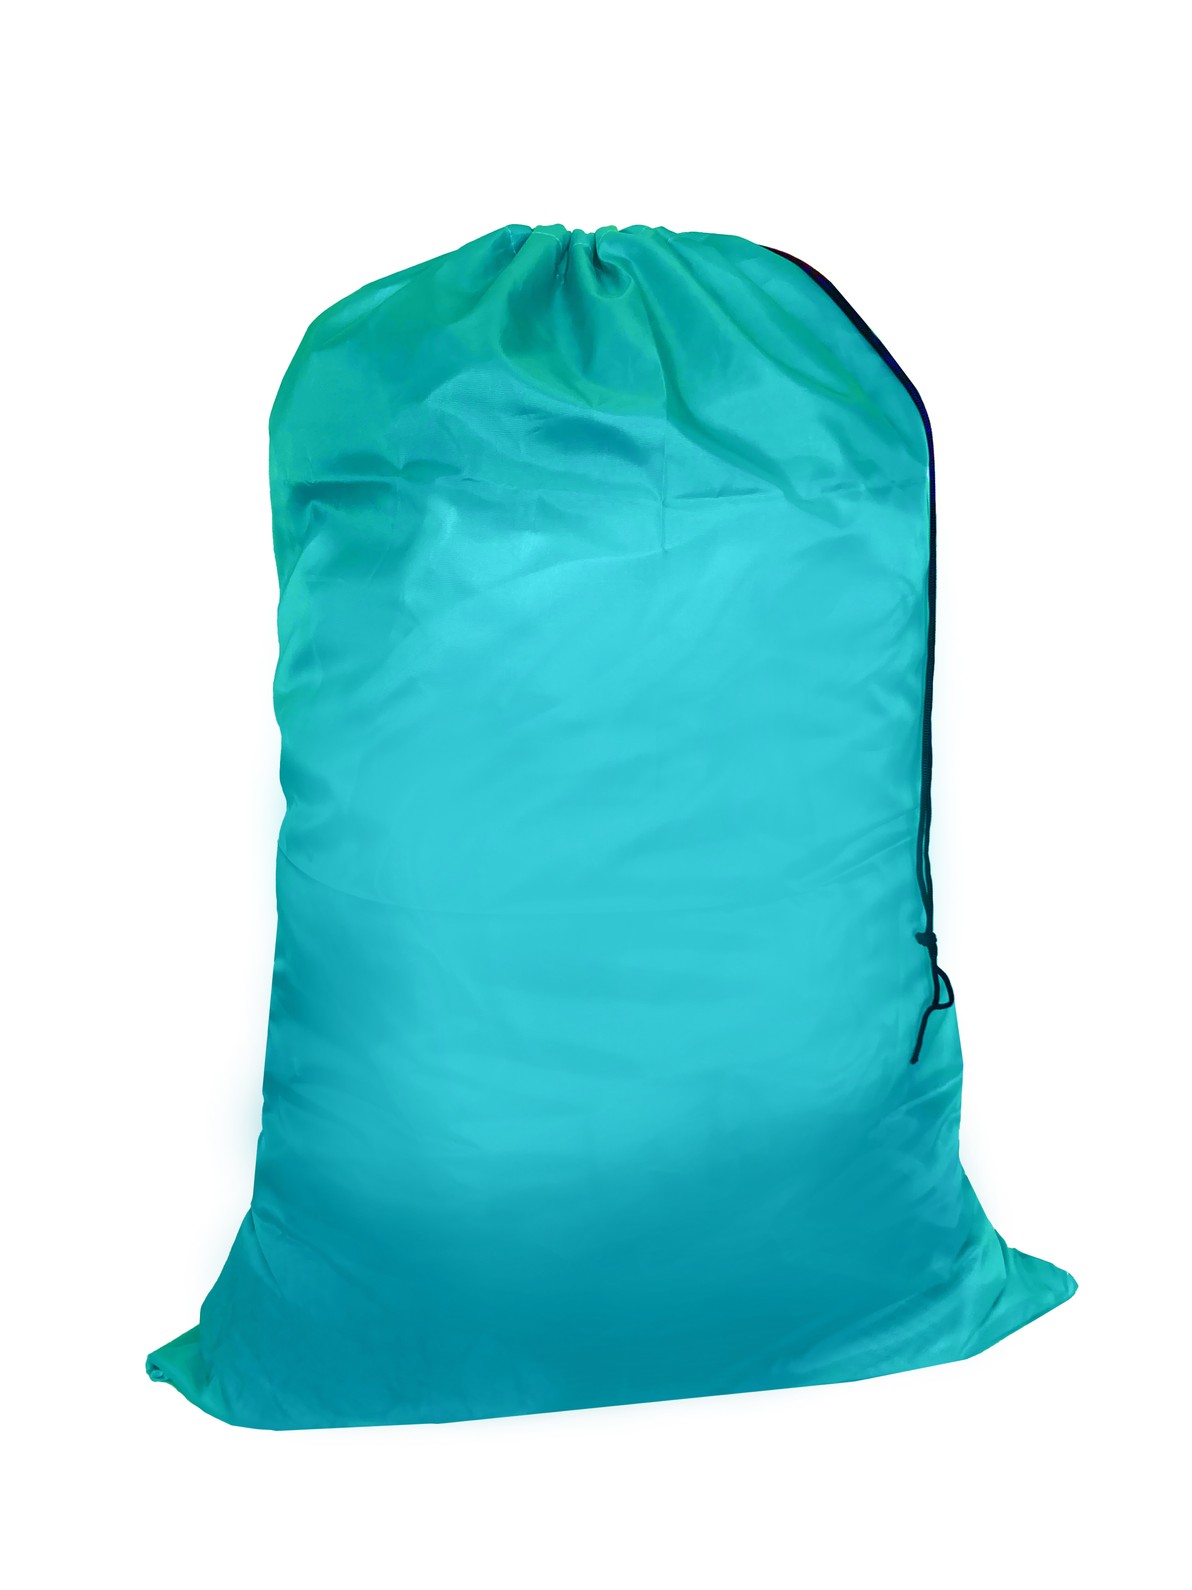 Teal - Large Polyester Laundry Bag